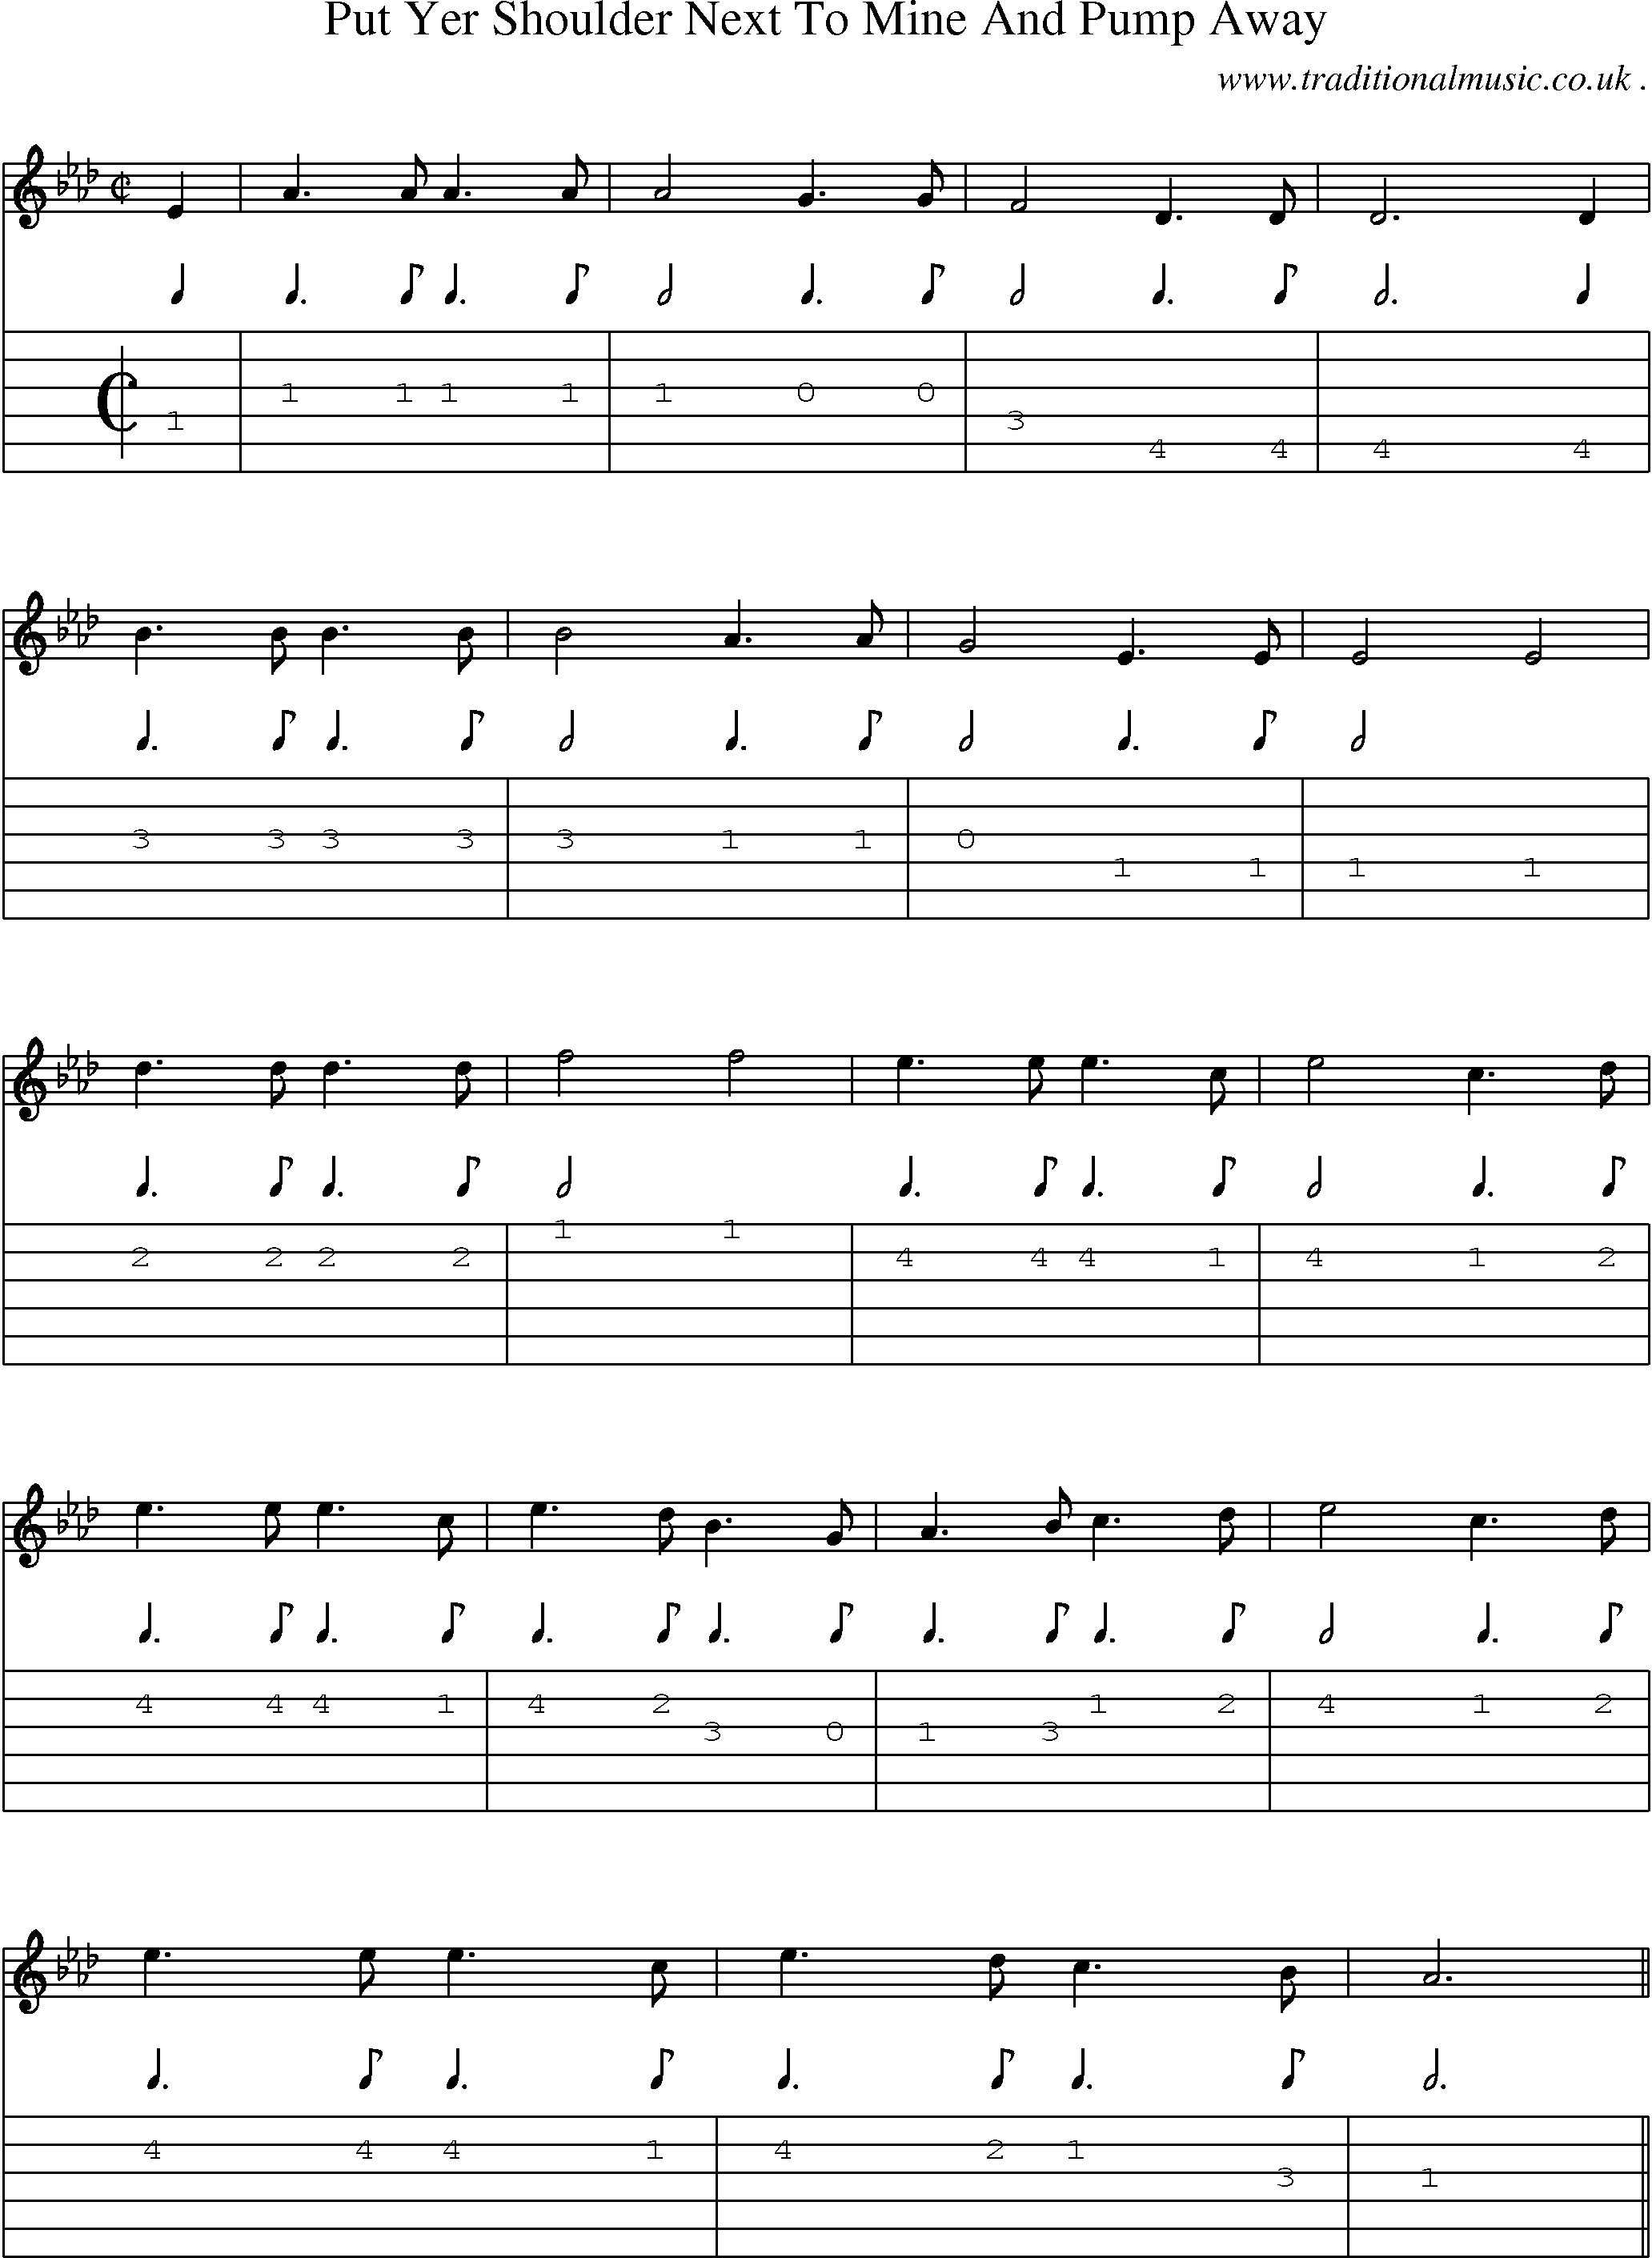 Sheet-Music and Guitar Tabs for Put Yer Shoulder Next To Mine And Pump Away